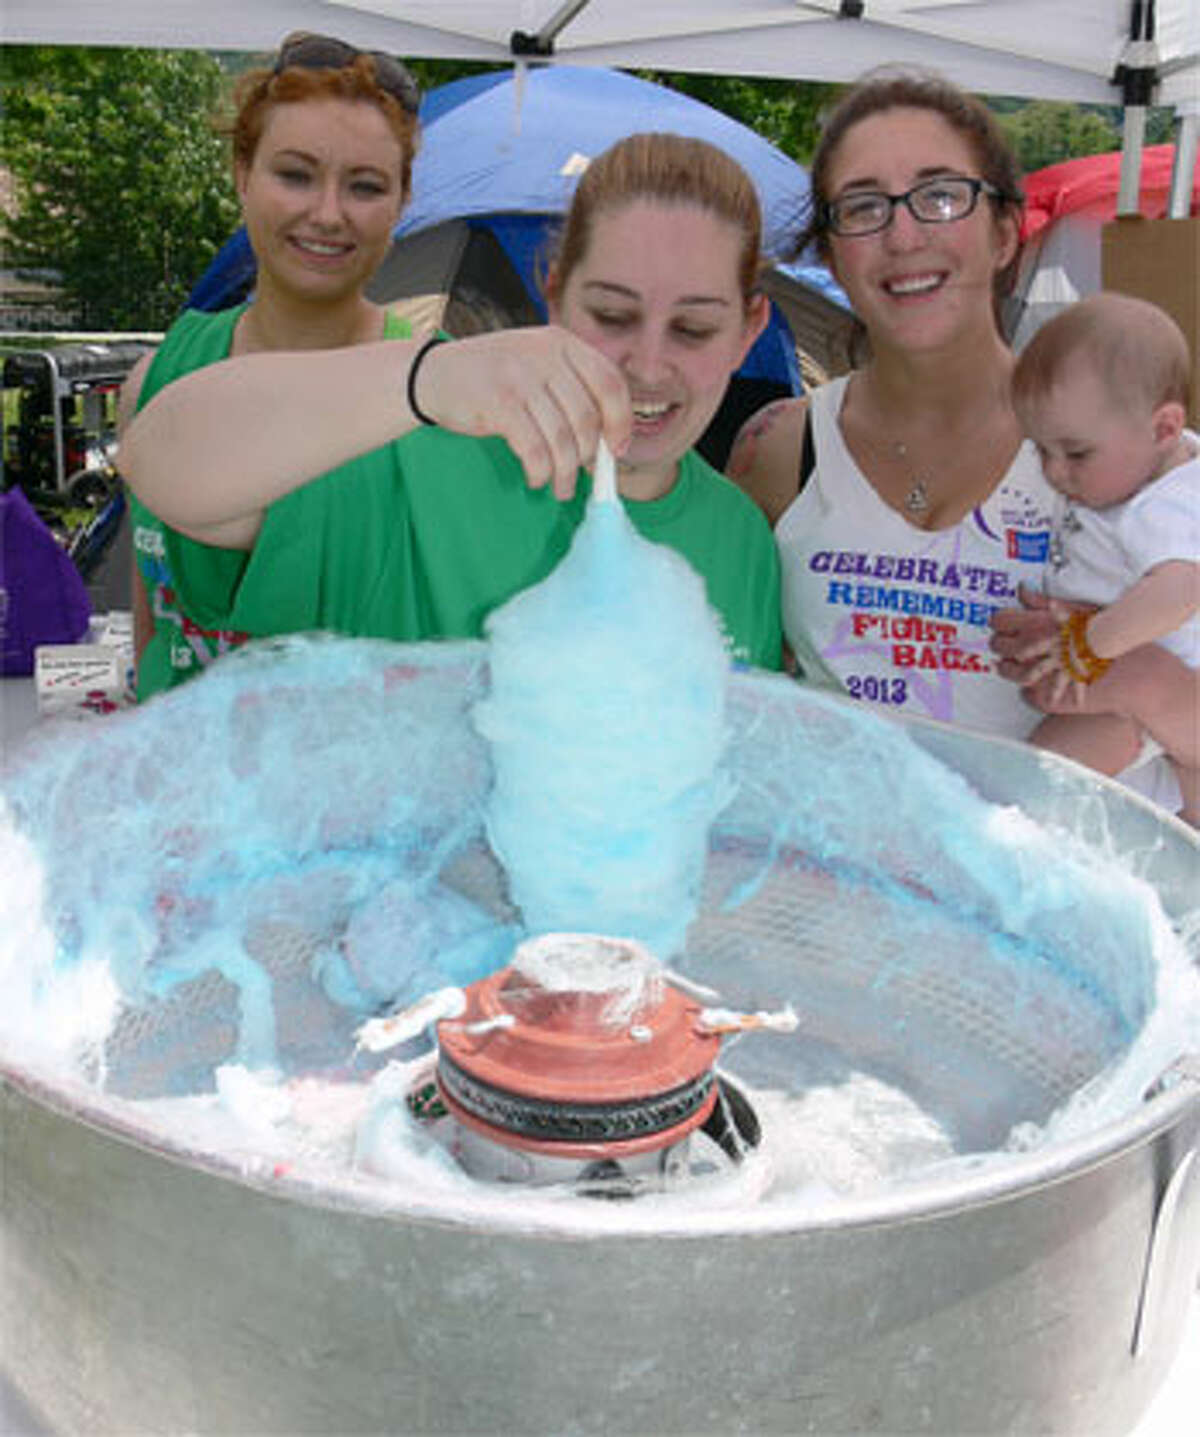 Mary Silva of Shelton makes cotton candy while joined by Cynthia Messaoudi of Seymour, left, and Maryann Linebarger of Shelton, right, who is holding Mary’s daughter, Zoe, age 6 months. They were representing a family-based team named Saving Second Base.